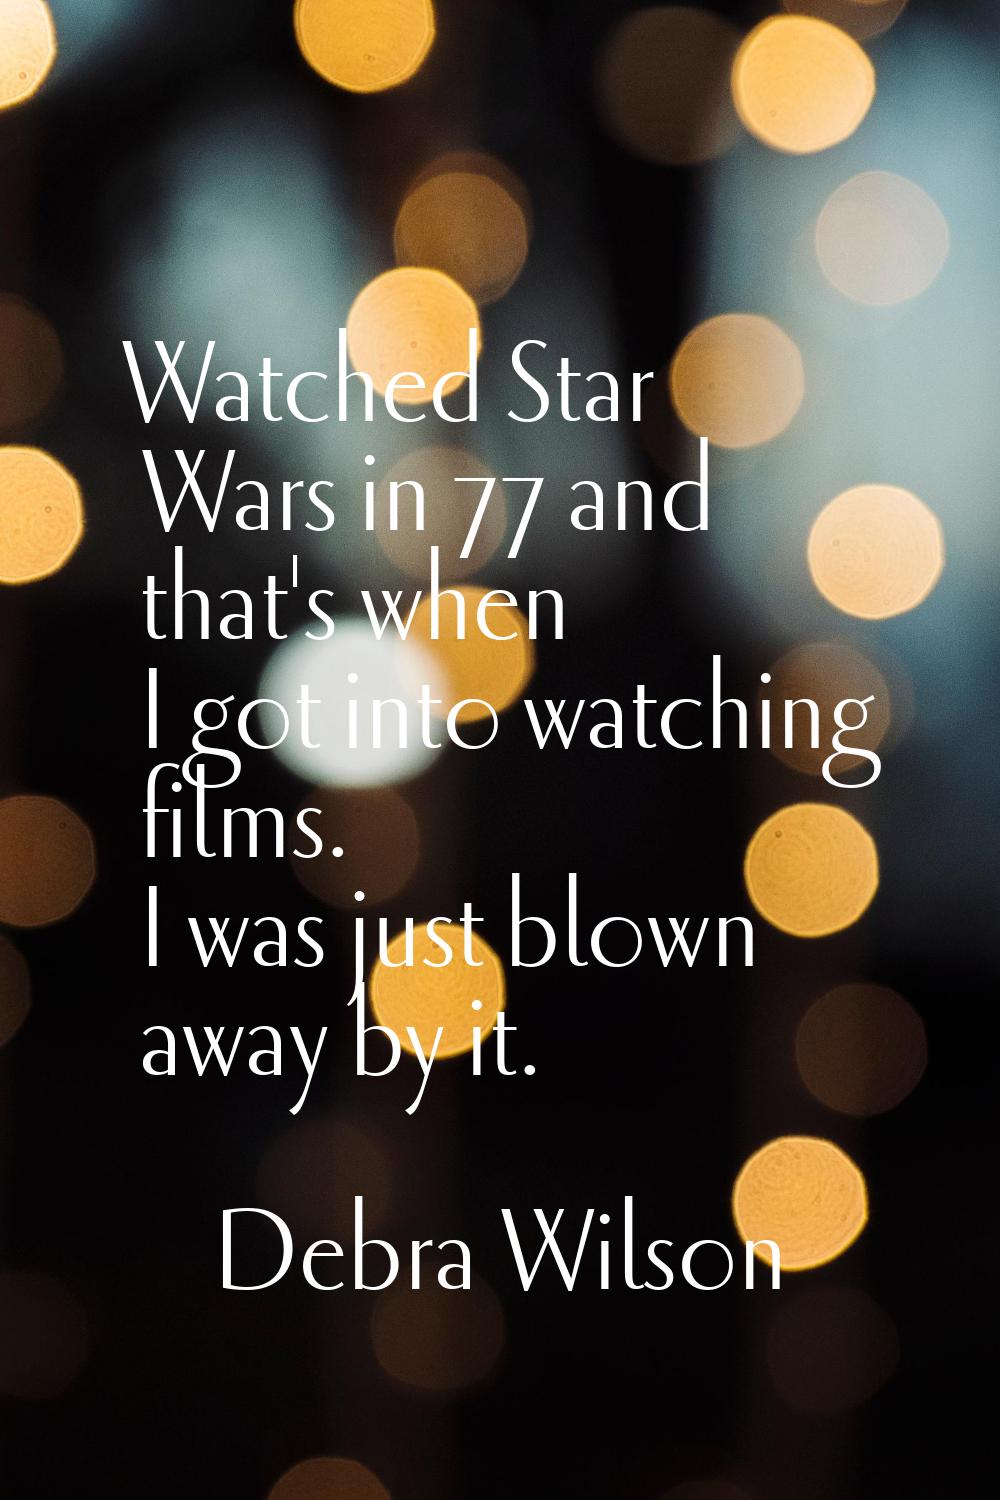 Watched Star Wars in 77 and that's when I got into watching films. I was just blown away by it.